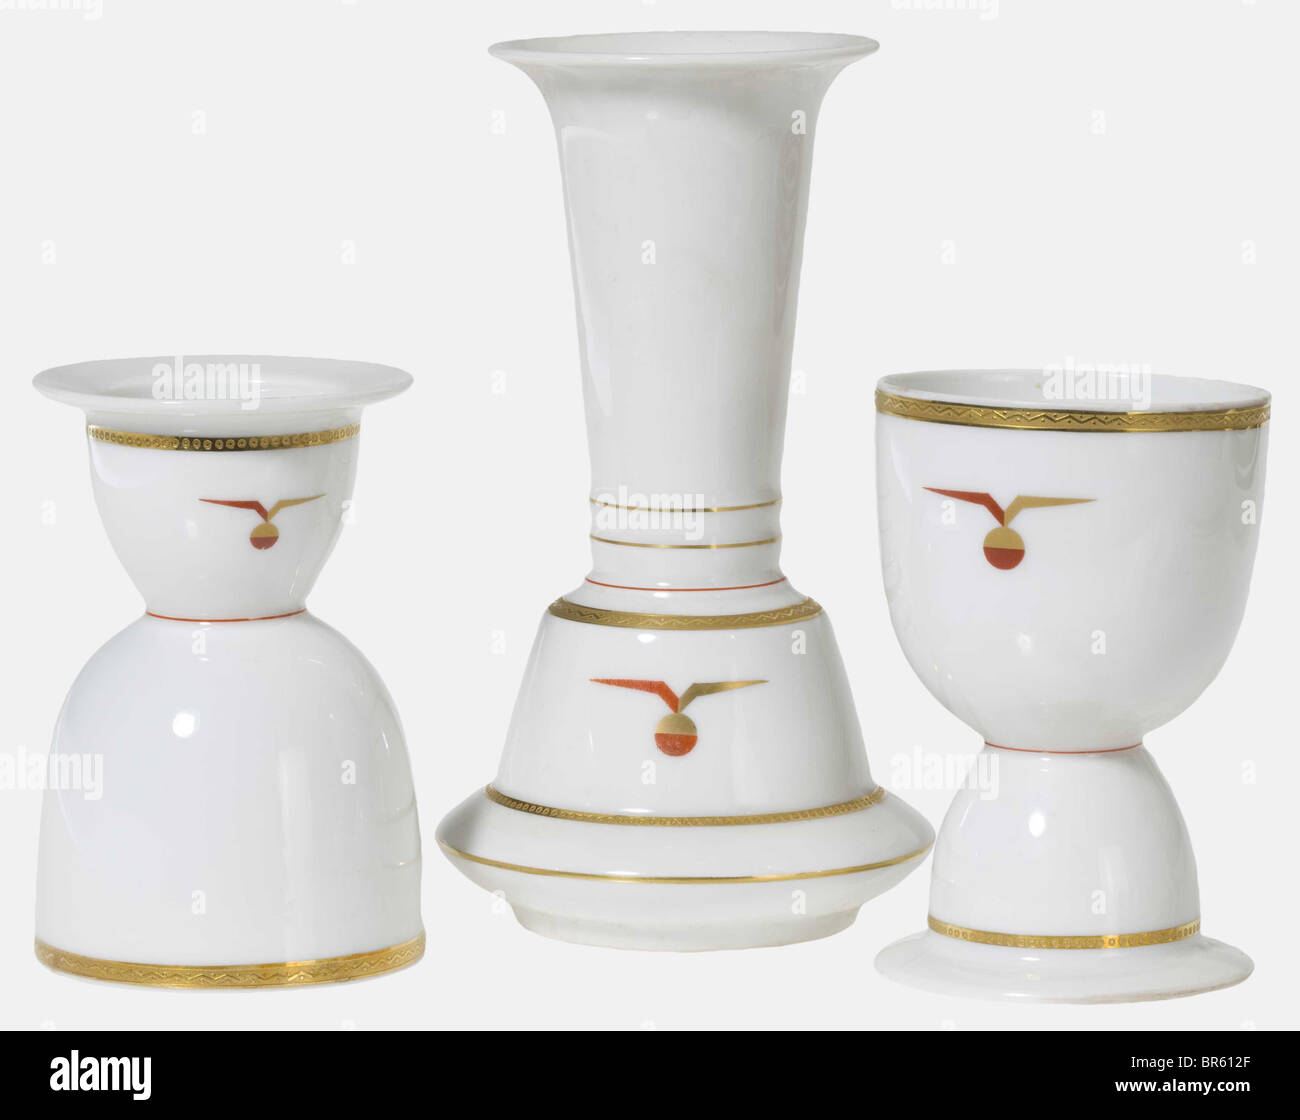 Dornier DO X 1929, 47 porcelain pieces from the service aboard White, glazed porcelain with decorative lines as well as a stylised, winged globe in gold and red. On the bottom manufacturer's mark in underglaze green 'Gräf & Krippner Selb Bavaria' as well as golden silhouette of the hydroplane over 'DO X 1929' and 'decoration by Marcel Dornier Langenargen'. Consisting of: Five dining plates, diameter 25.5 cm. Twelve soup plates, diameter 25.2 cm. 15 dessert plates, three with and twelve without the globe emblem, but all except one with the golden DO-X on the bot, Stock Photo